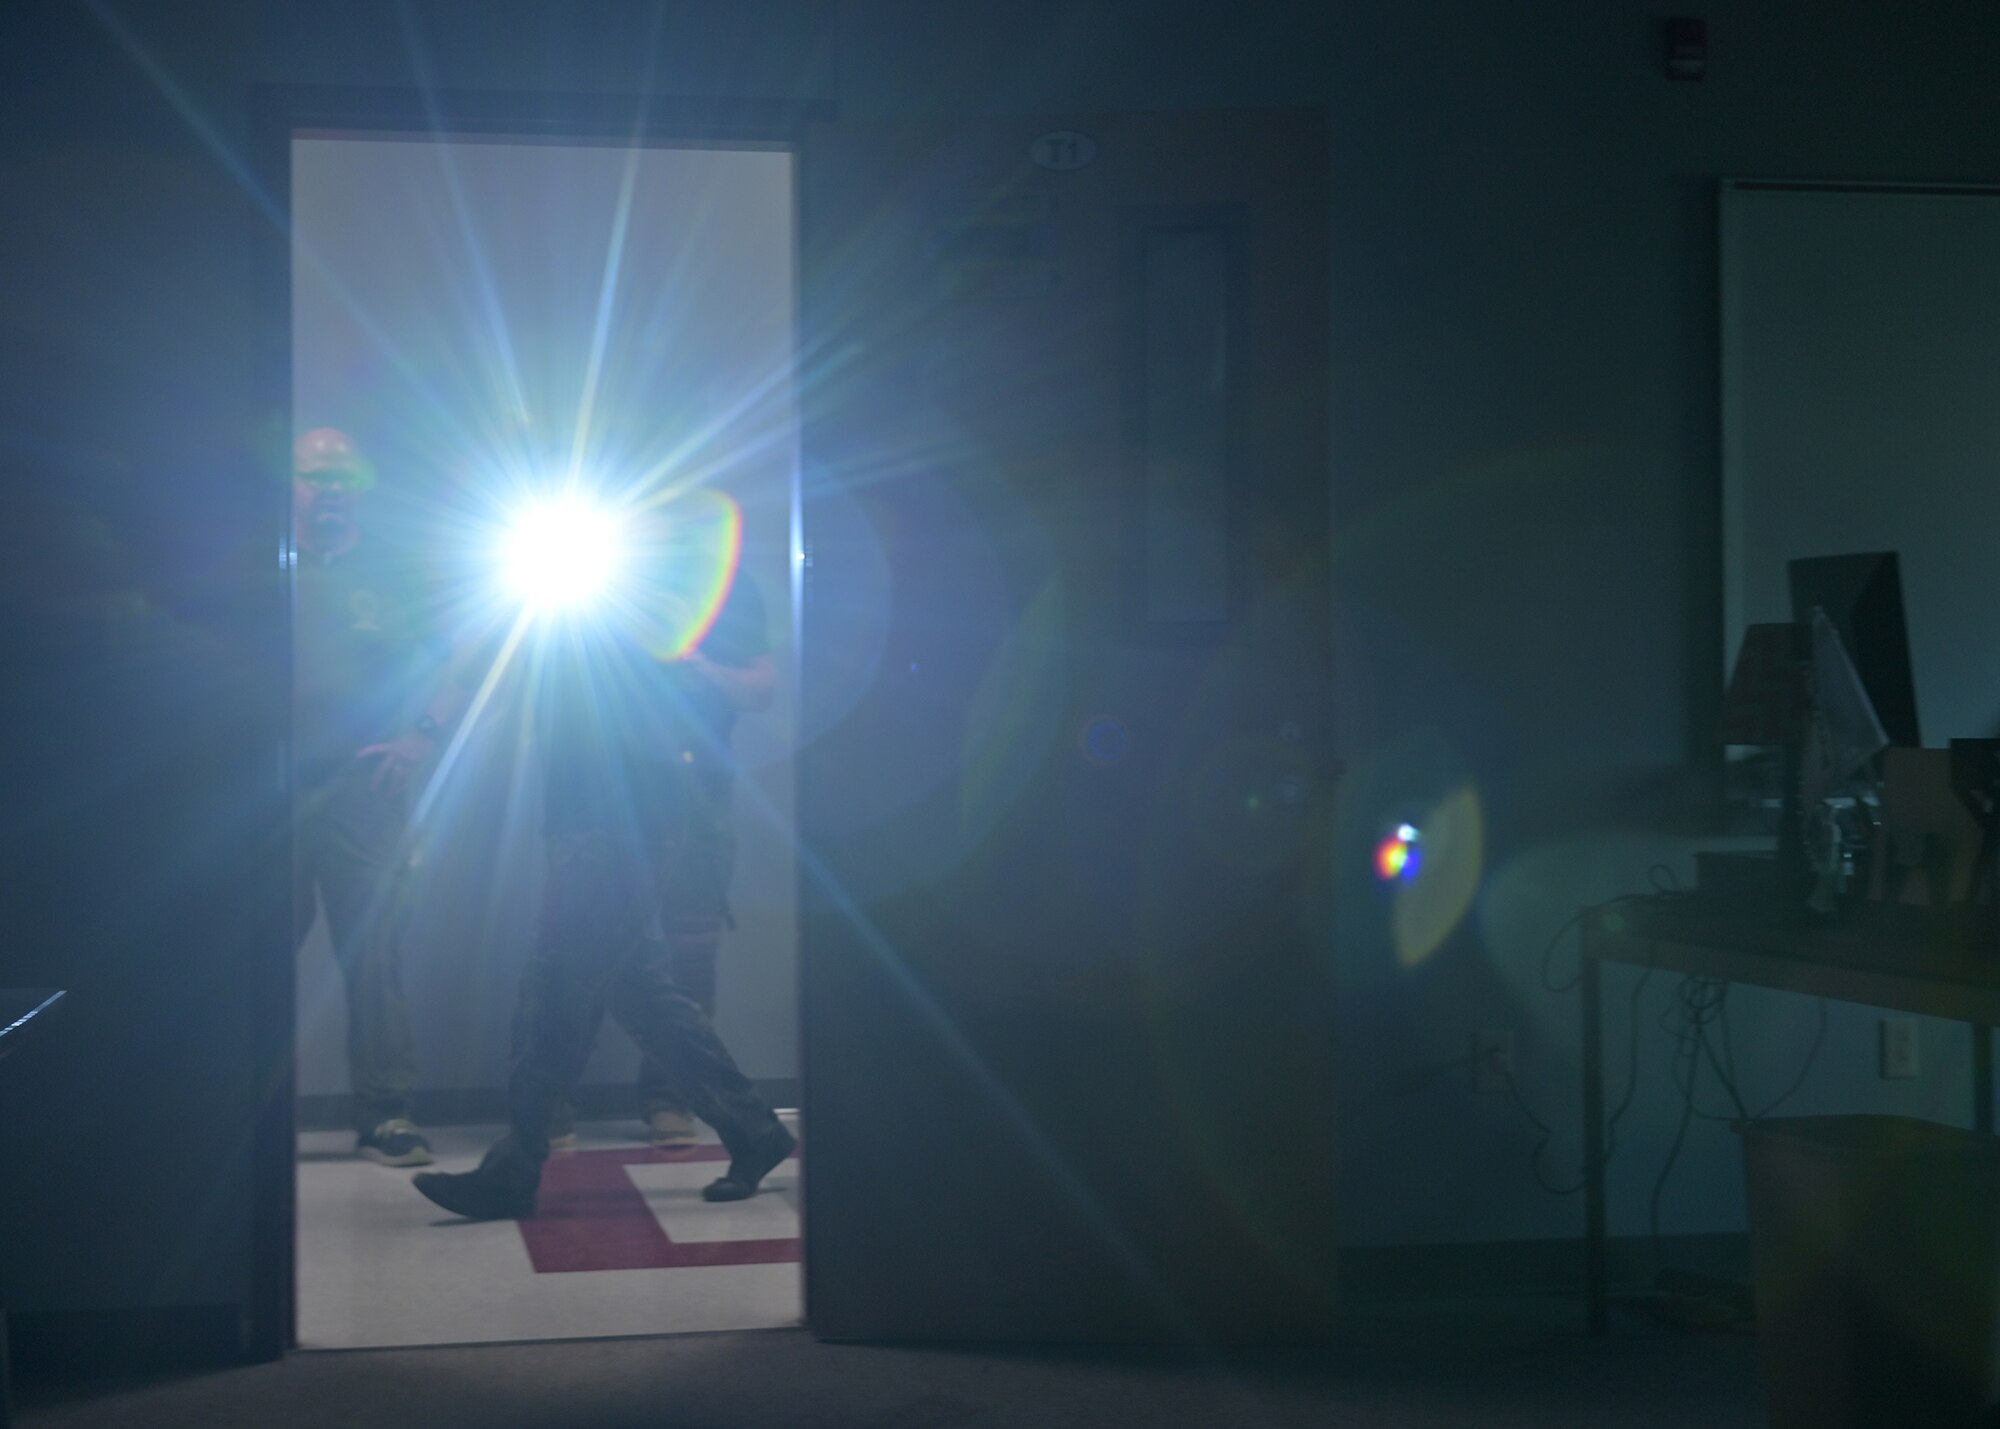 A SWAT member flashes a light into a dark room.